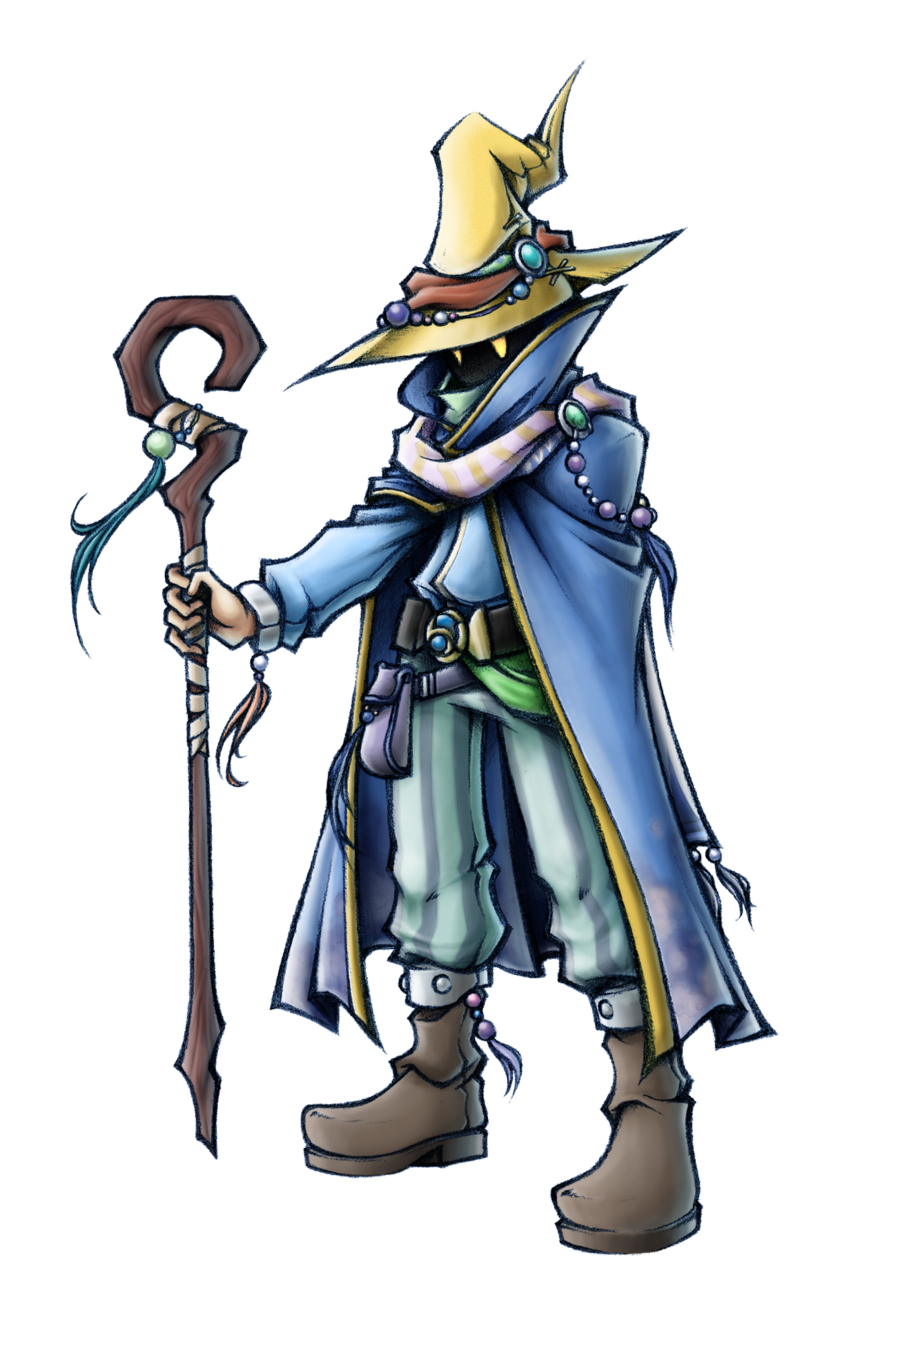 http://magenevelde.ucoz.hu/dissidia_black_mage_of_light_by_isaiahjordan-d5hz8.png